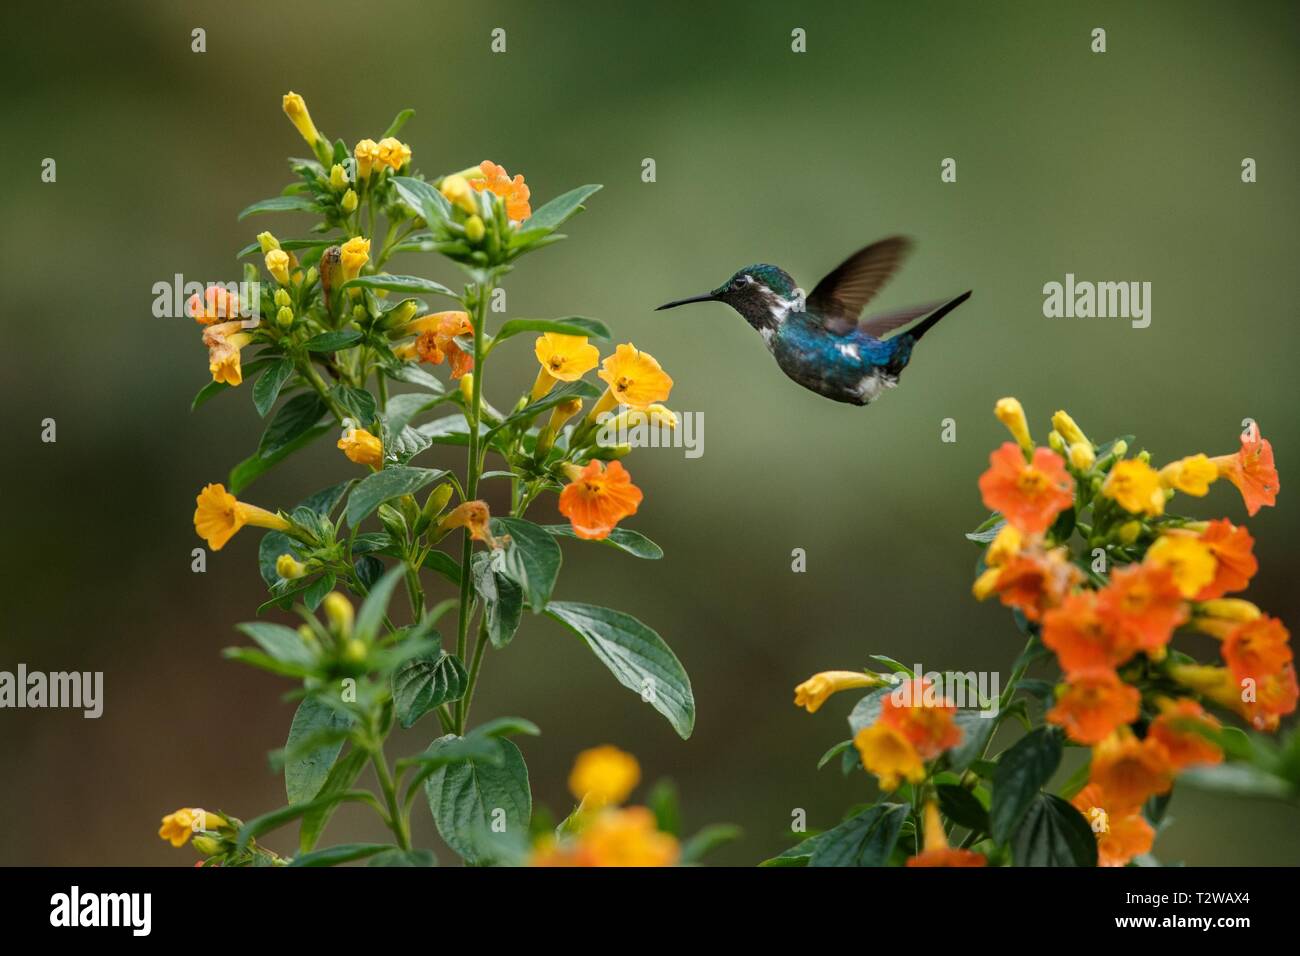 Endemic Santa Marta woodstar hovering next to yellow flowers in garden,hummingbird with outstretched wings,Colombia,bird,clear background,nature scene Stock Photo